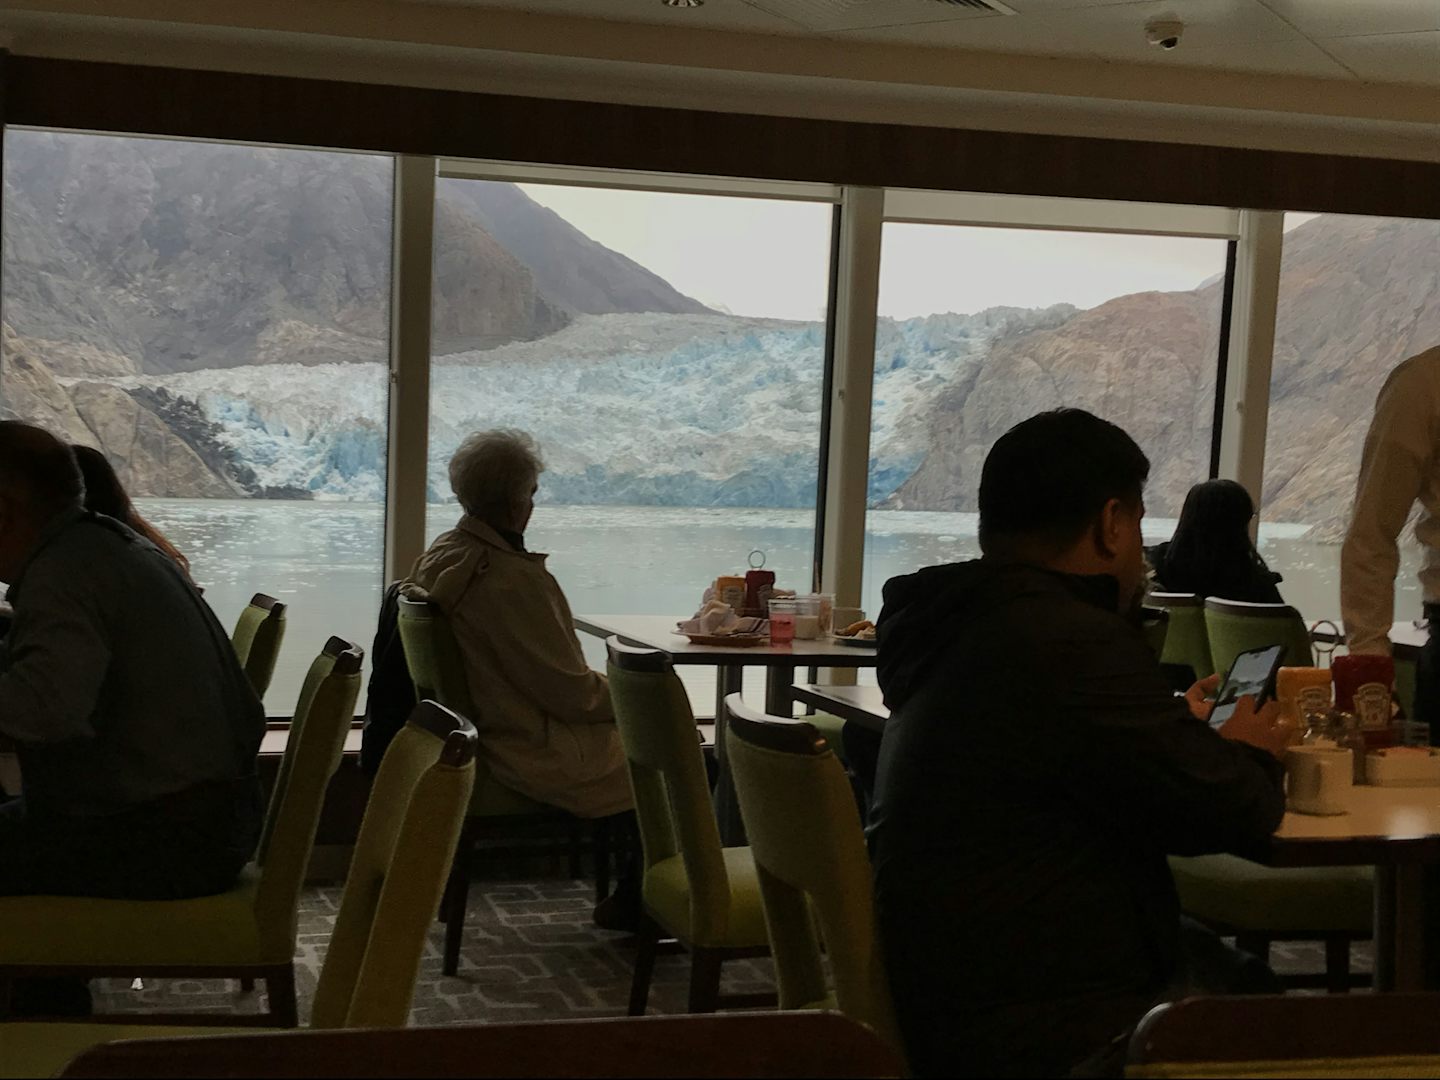 South Sawyer Glacier - view from Garden Cafe (buffet style restaurant). 